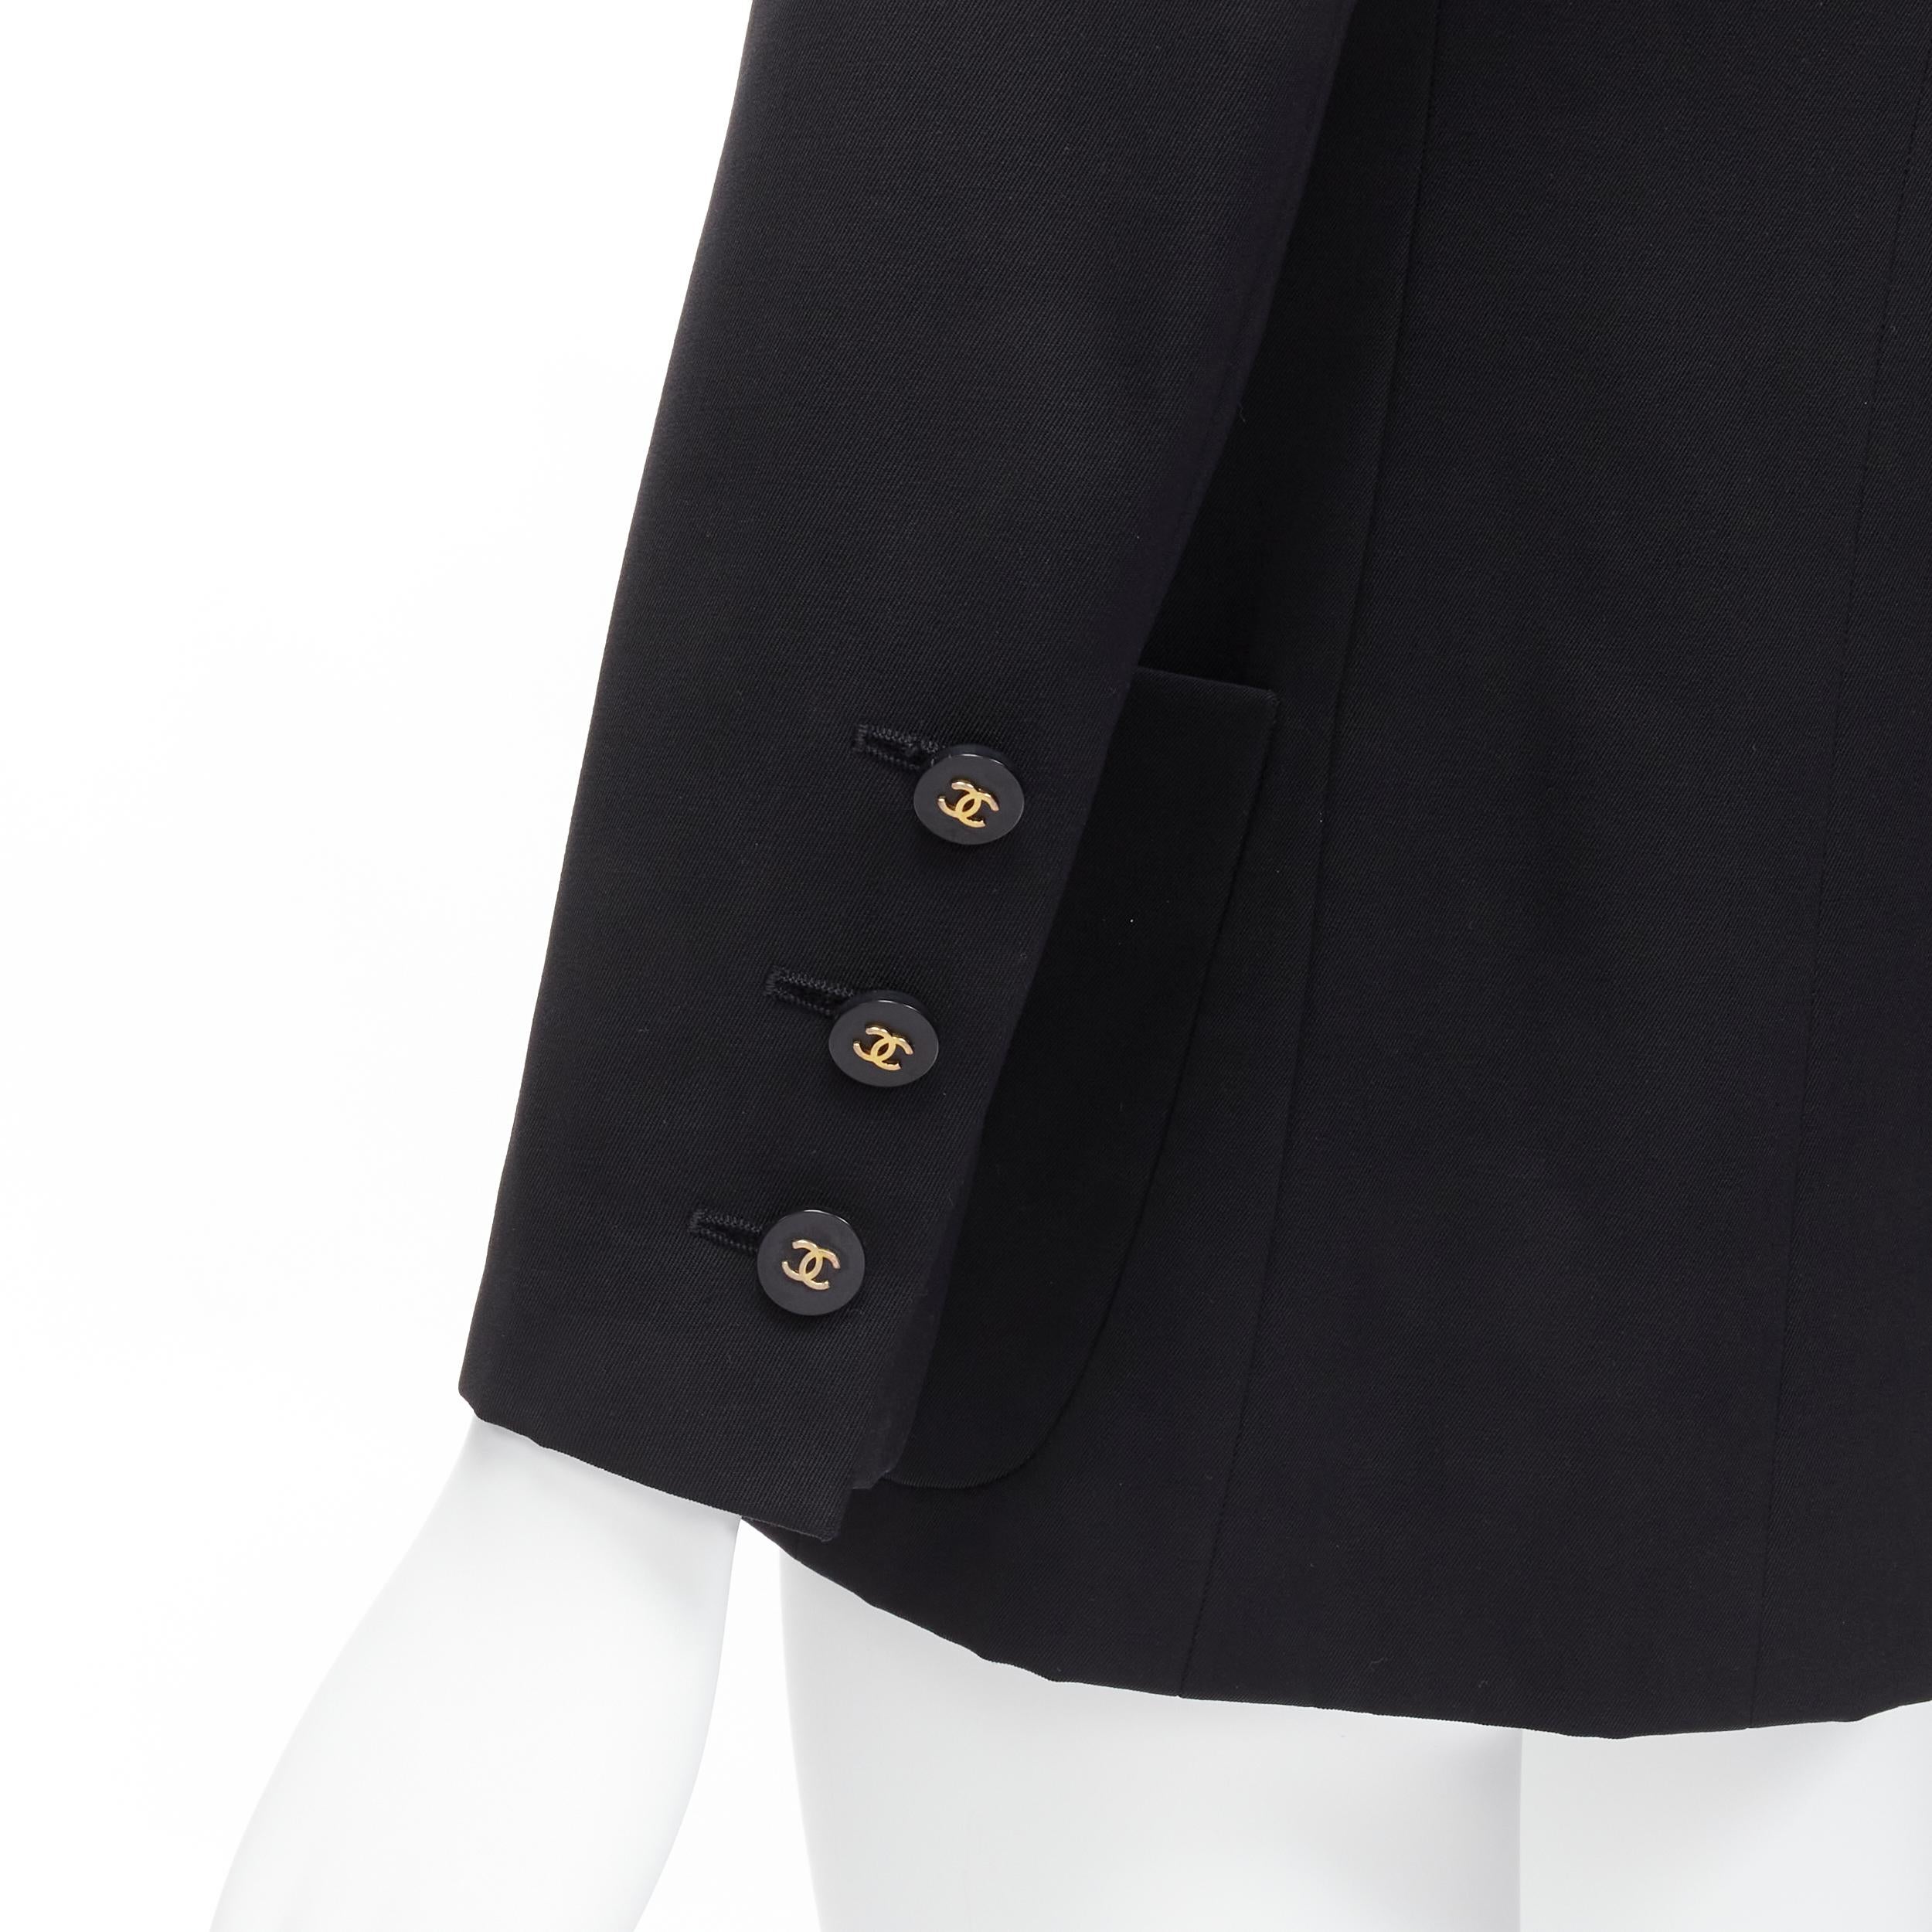 CHANEL 94A Vintage black wool gold CC button monogram lining blazer FR34 XS
Reference: TGAS/D00331
Brand: Chanel
Designer: Karl Lagerfeld
Collection: Fall 1994
Material: Wool
Color: Black, Gold
Pattern: Solid
Closure: Button
Lining: Black Silk
Extra